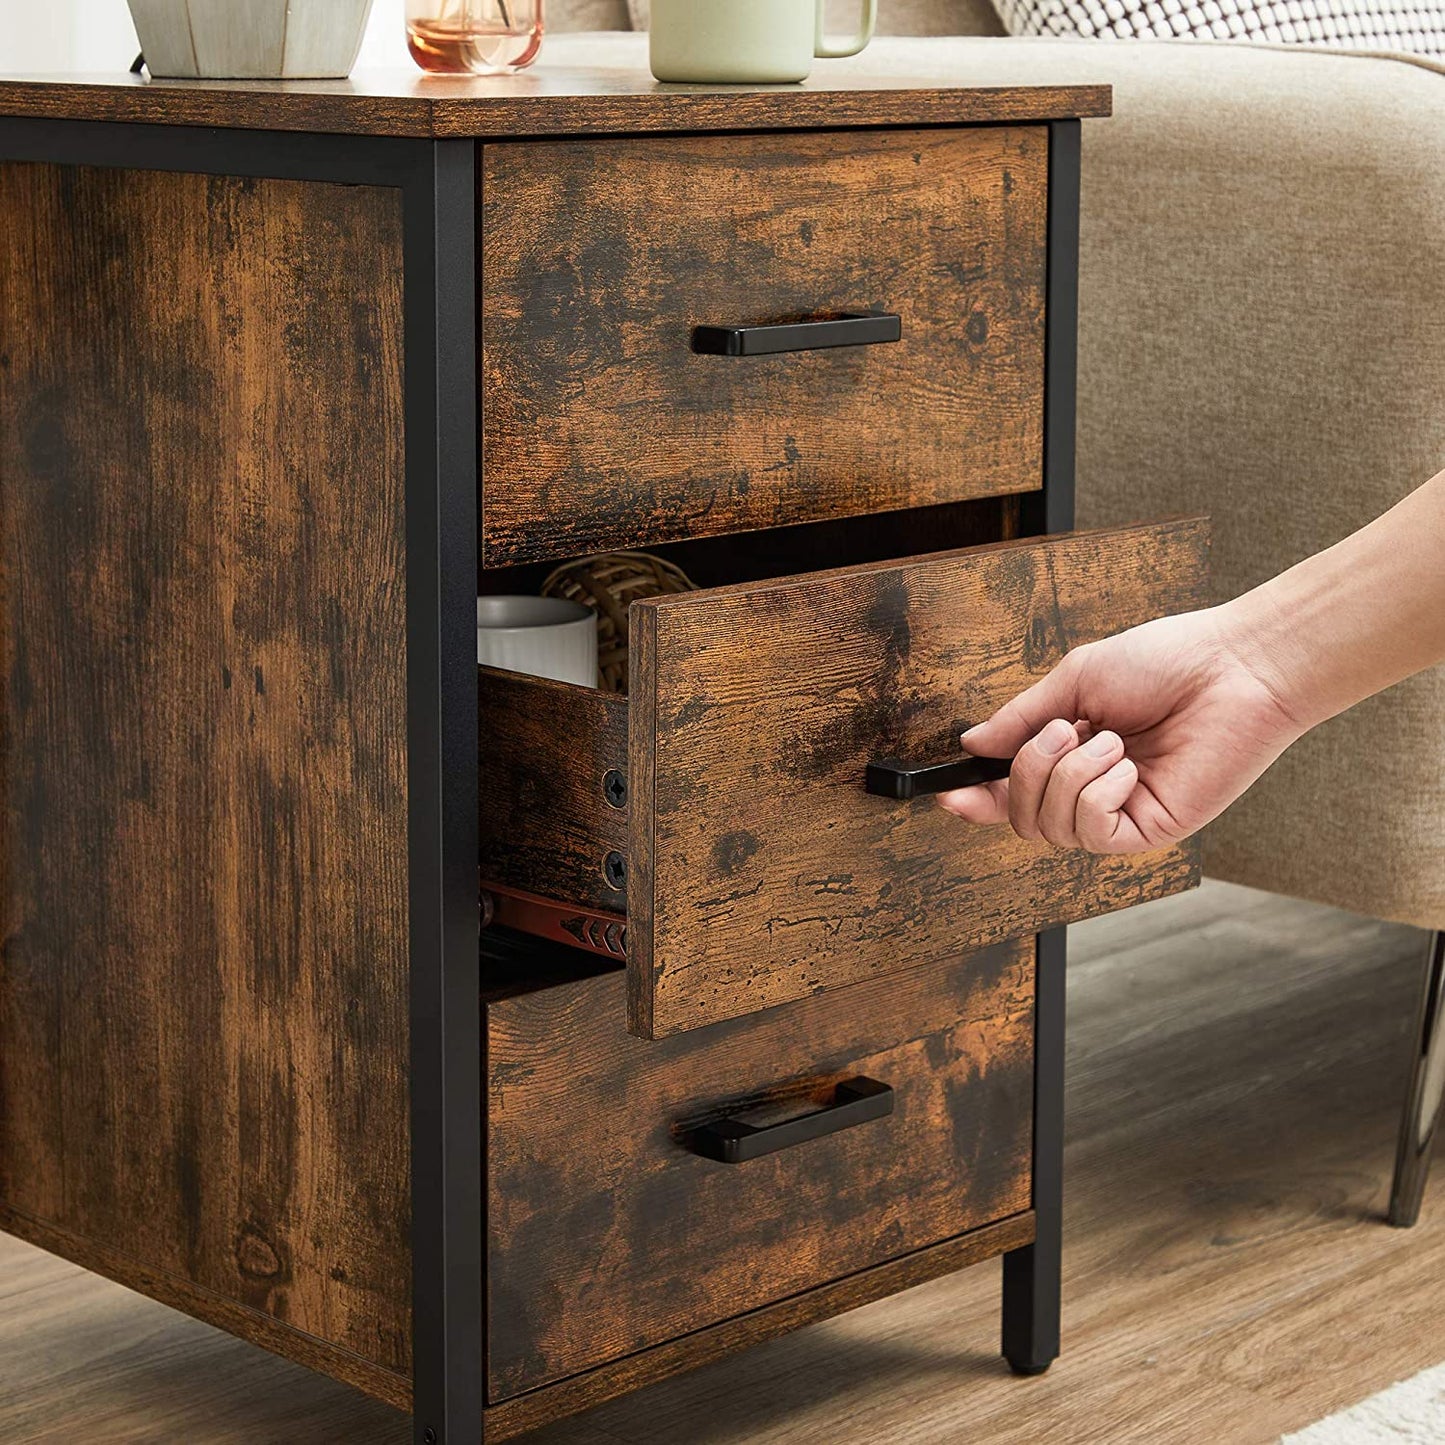 Nancy's Porterville Bedside table - Chest of drawers - Side table - 3 Drawers - Industrial - Brown - Black - Engineered Wood - Metal - 40 x 40 x 60 cm